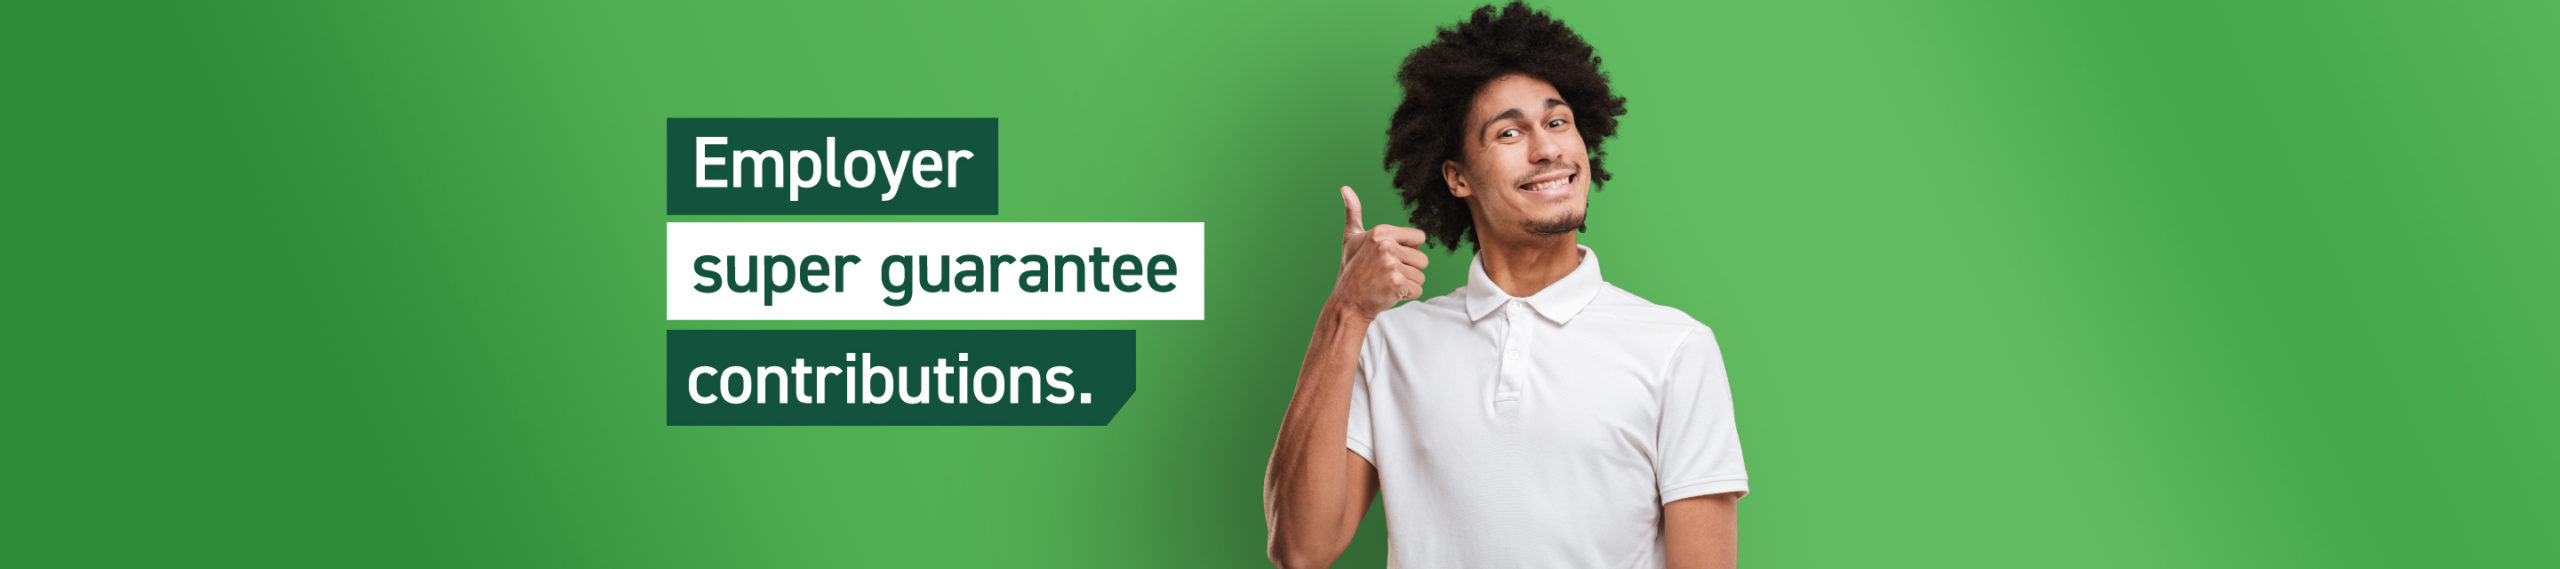 Transferred your KiwiSaver to First Super? Great. Now set up your employer super guarantee contributions to First Super. Simple.